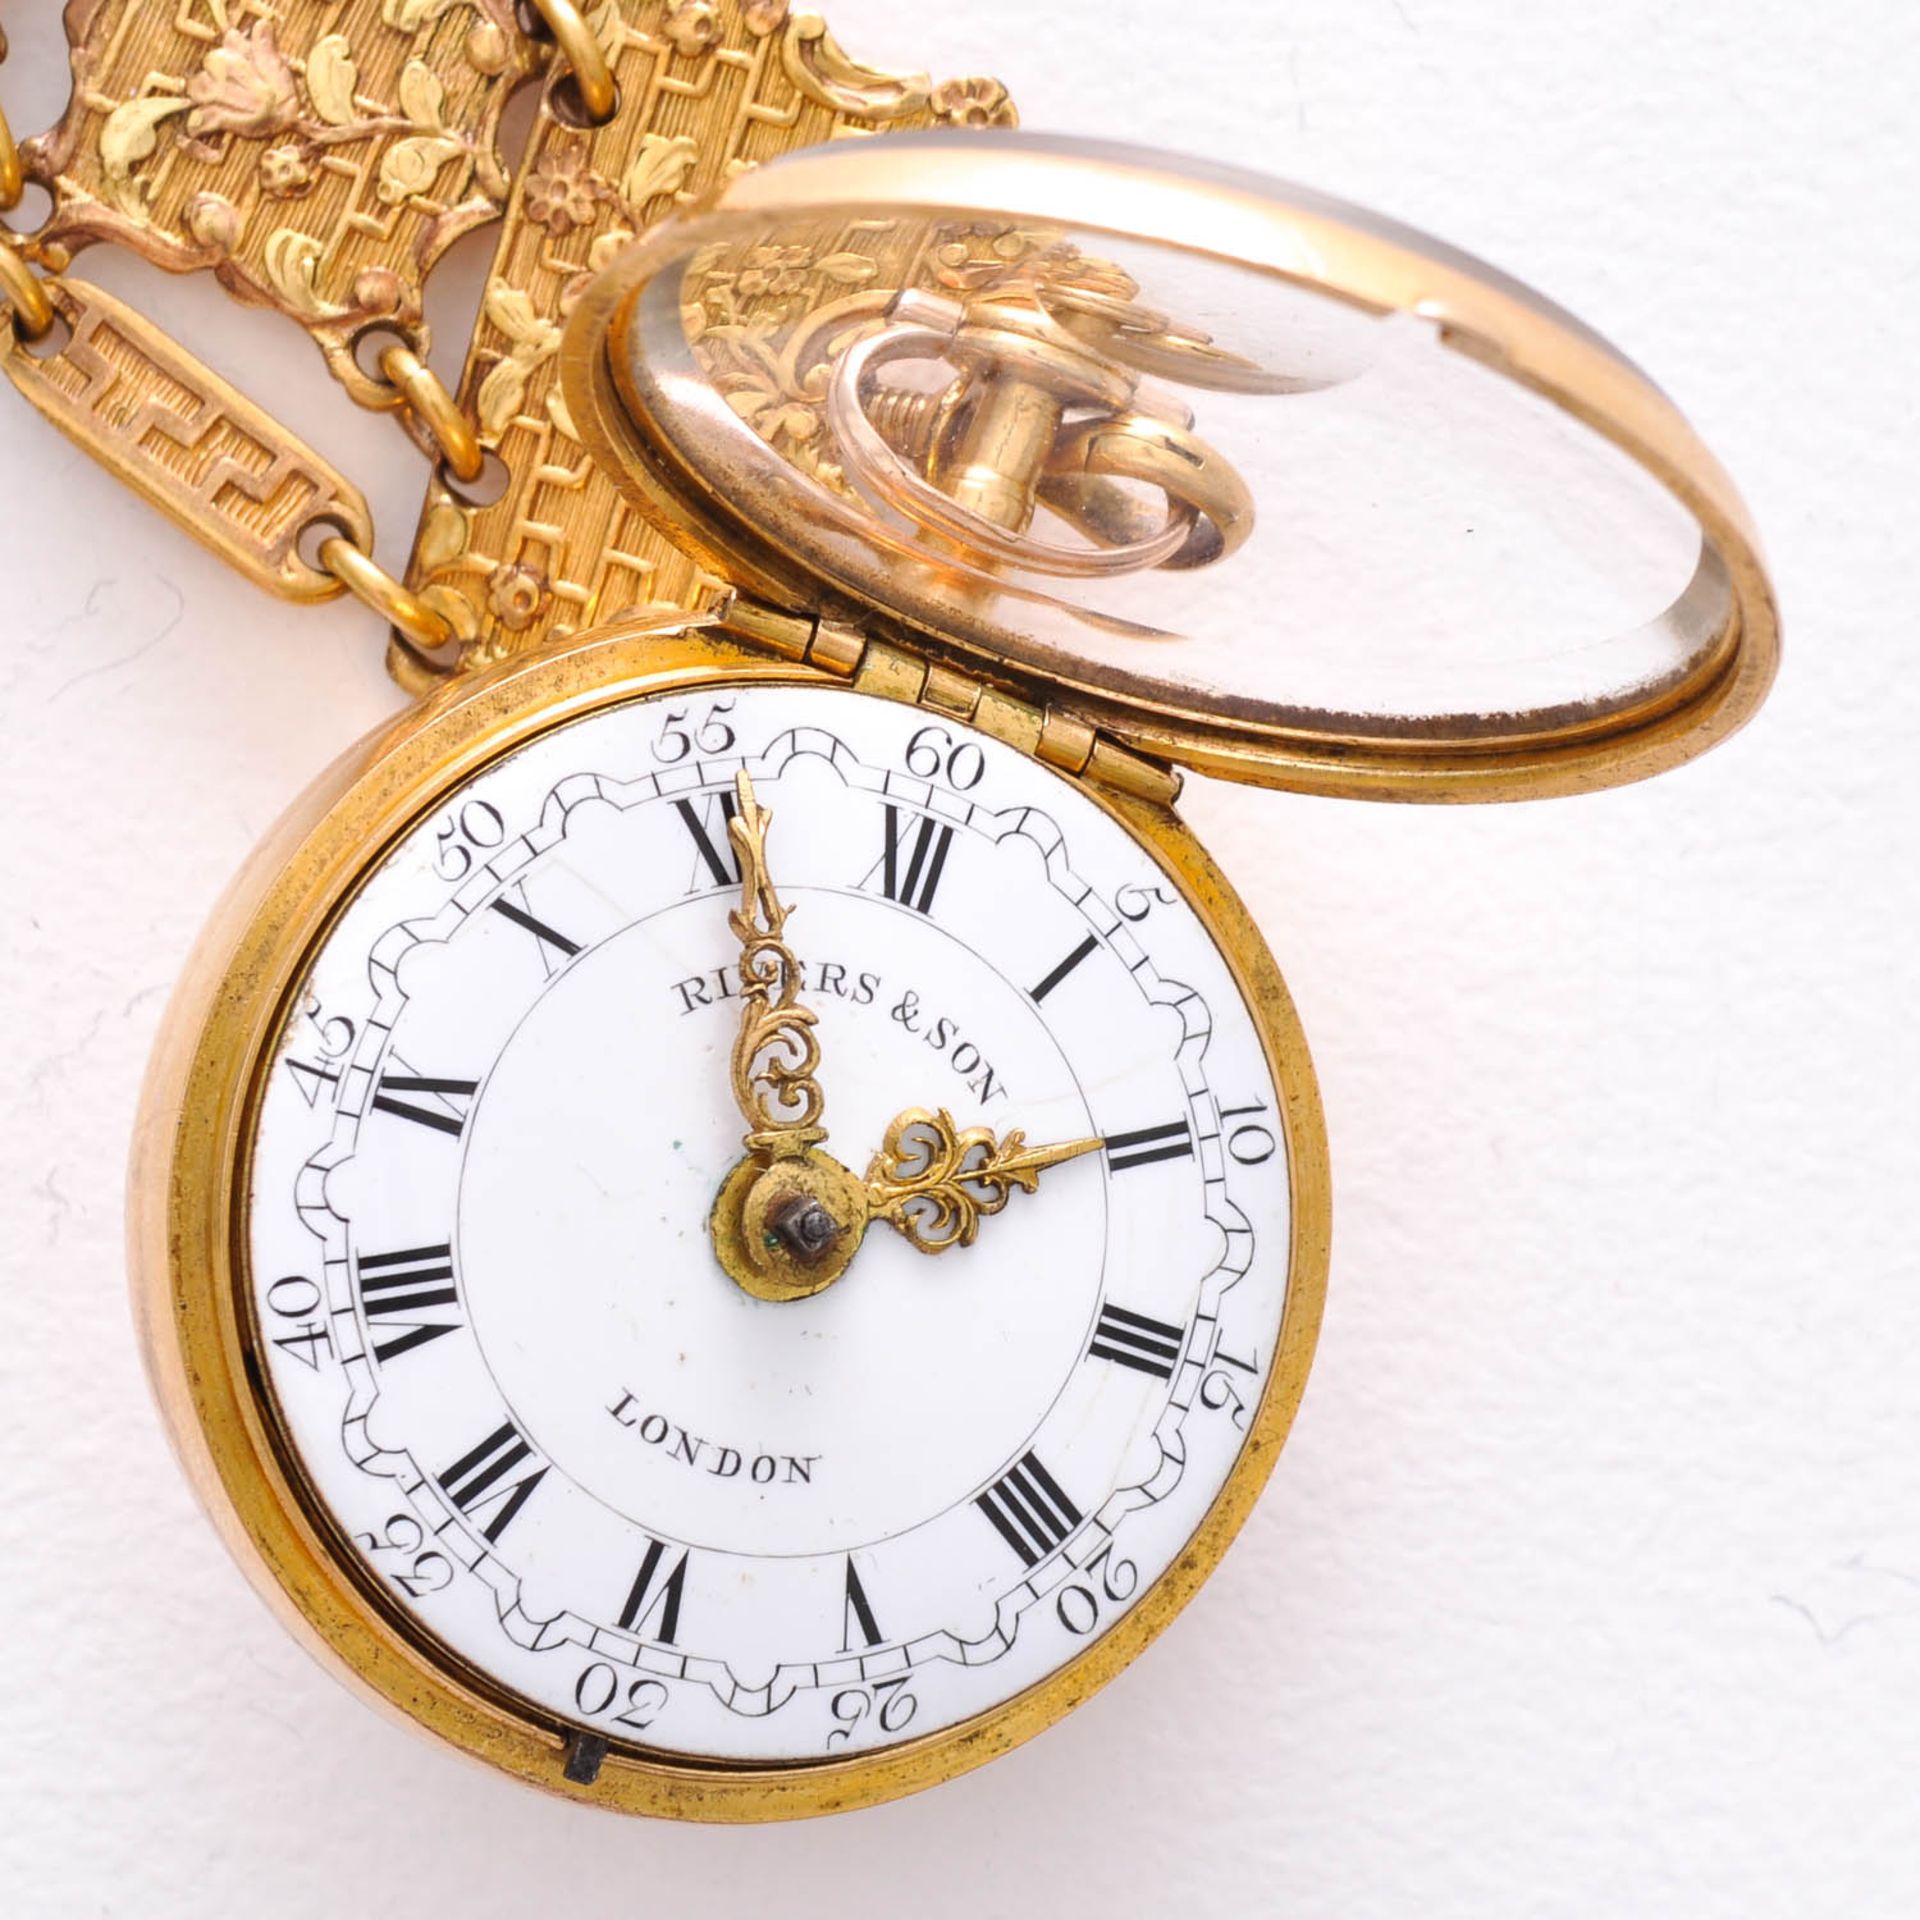 A Late 18th Century 18KG Pocket Watch - Image 5 of 5